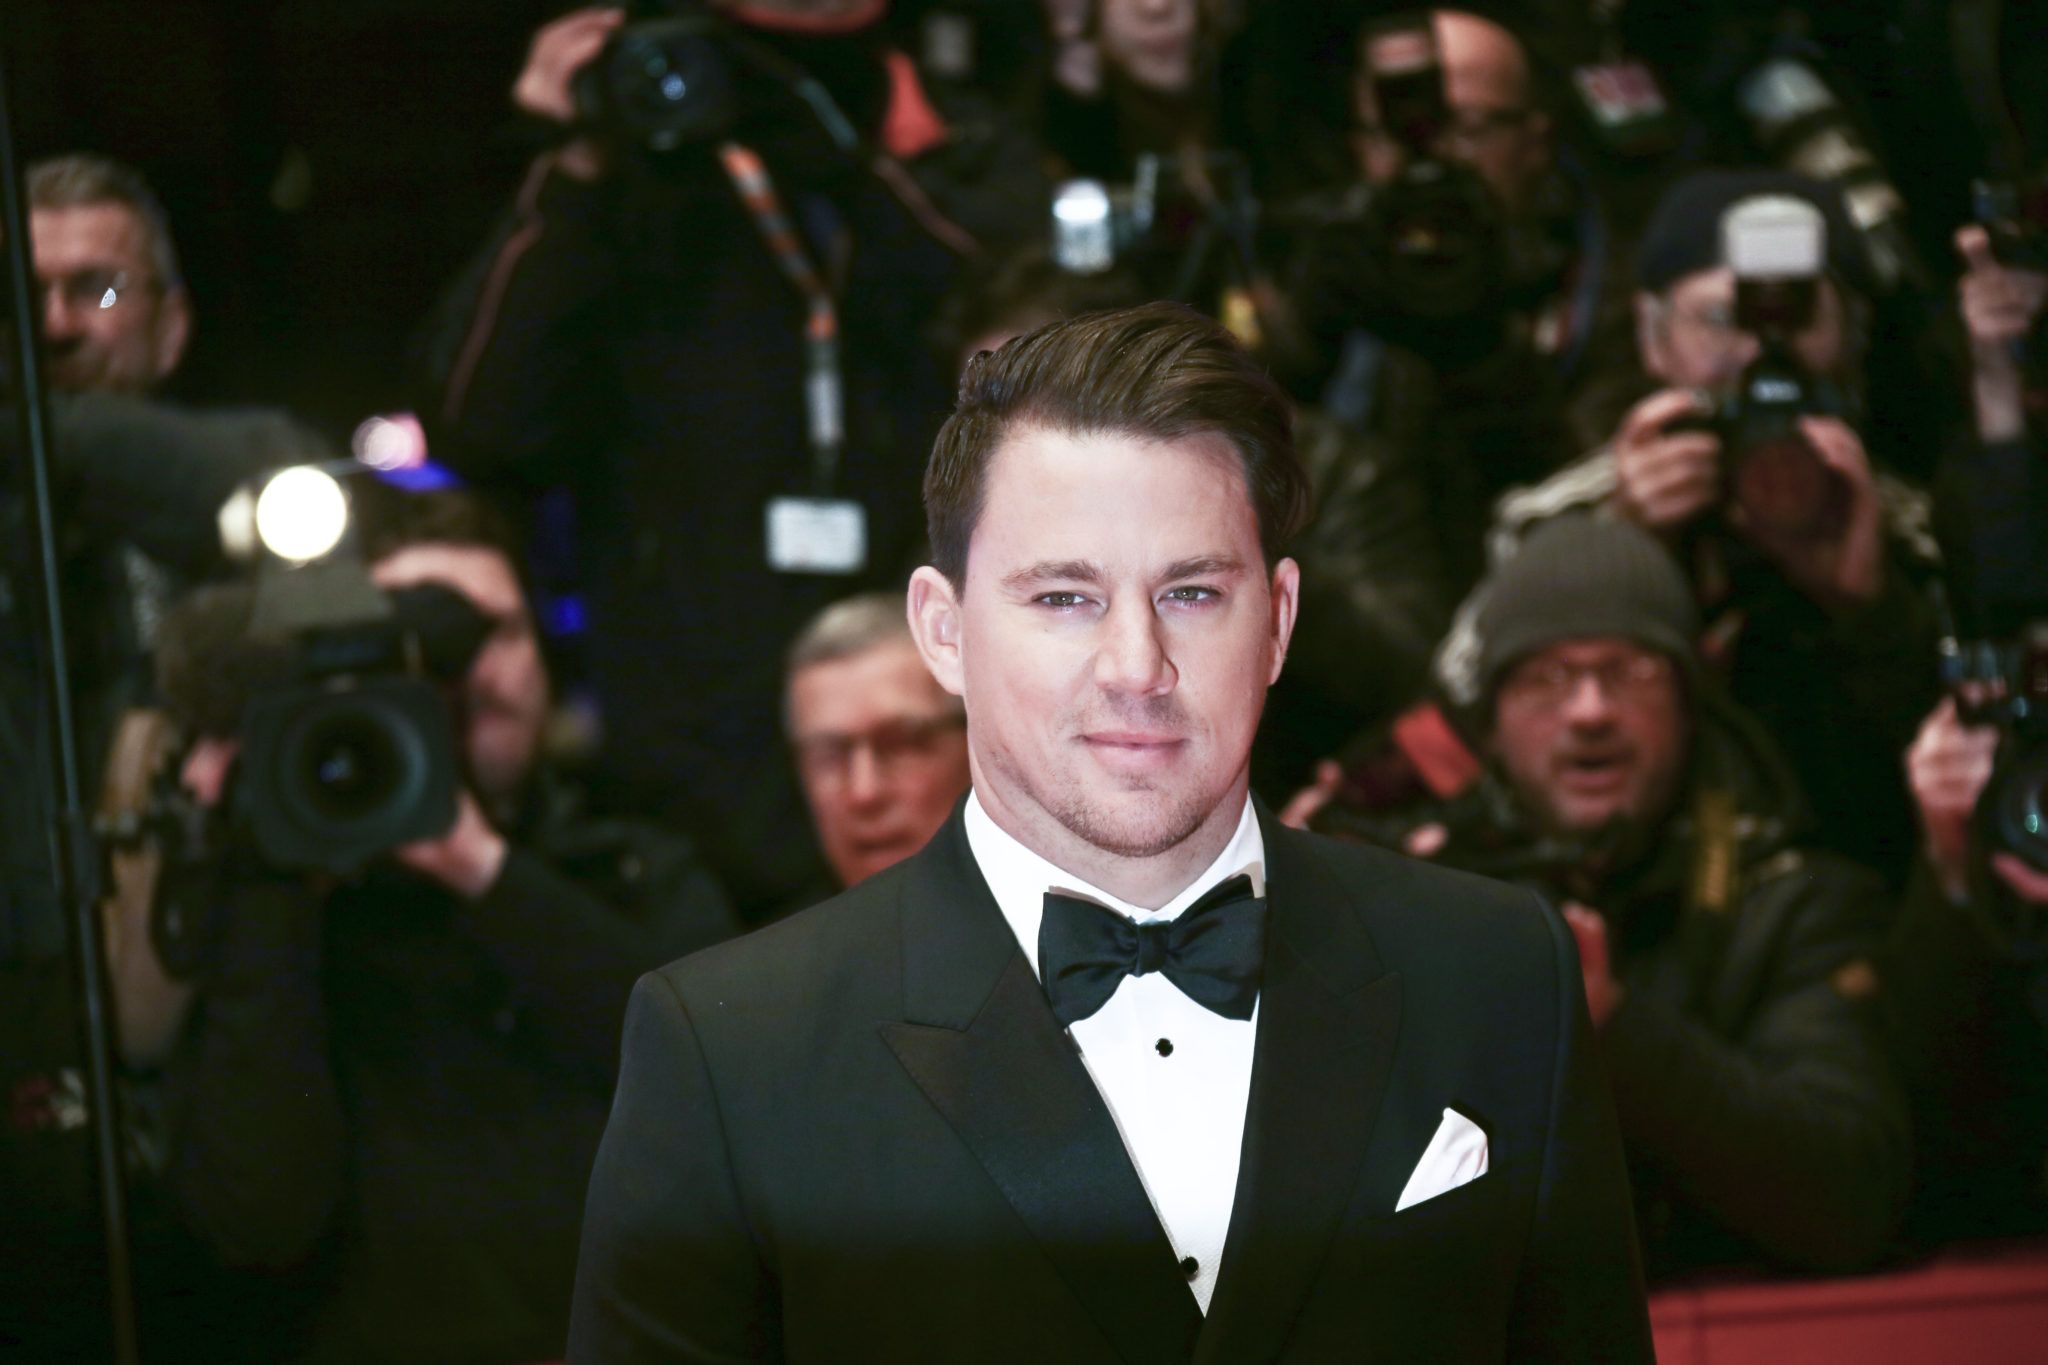 Channing Tatum at a red carpet event